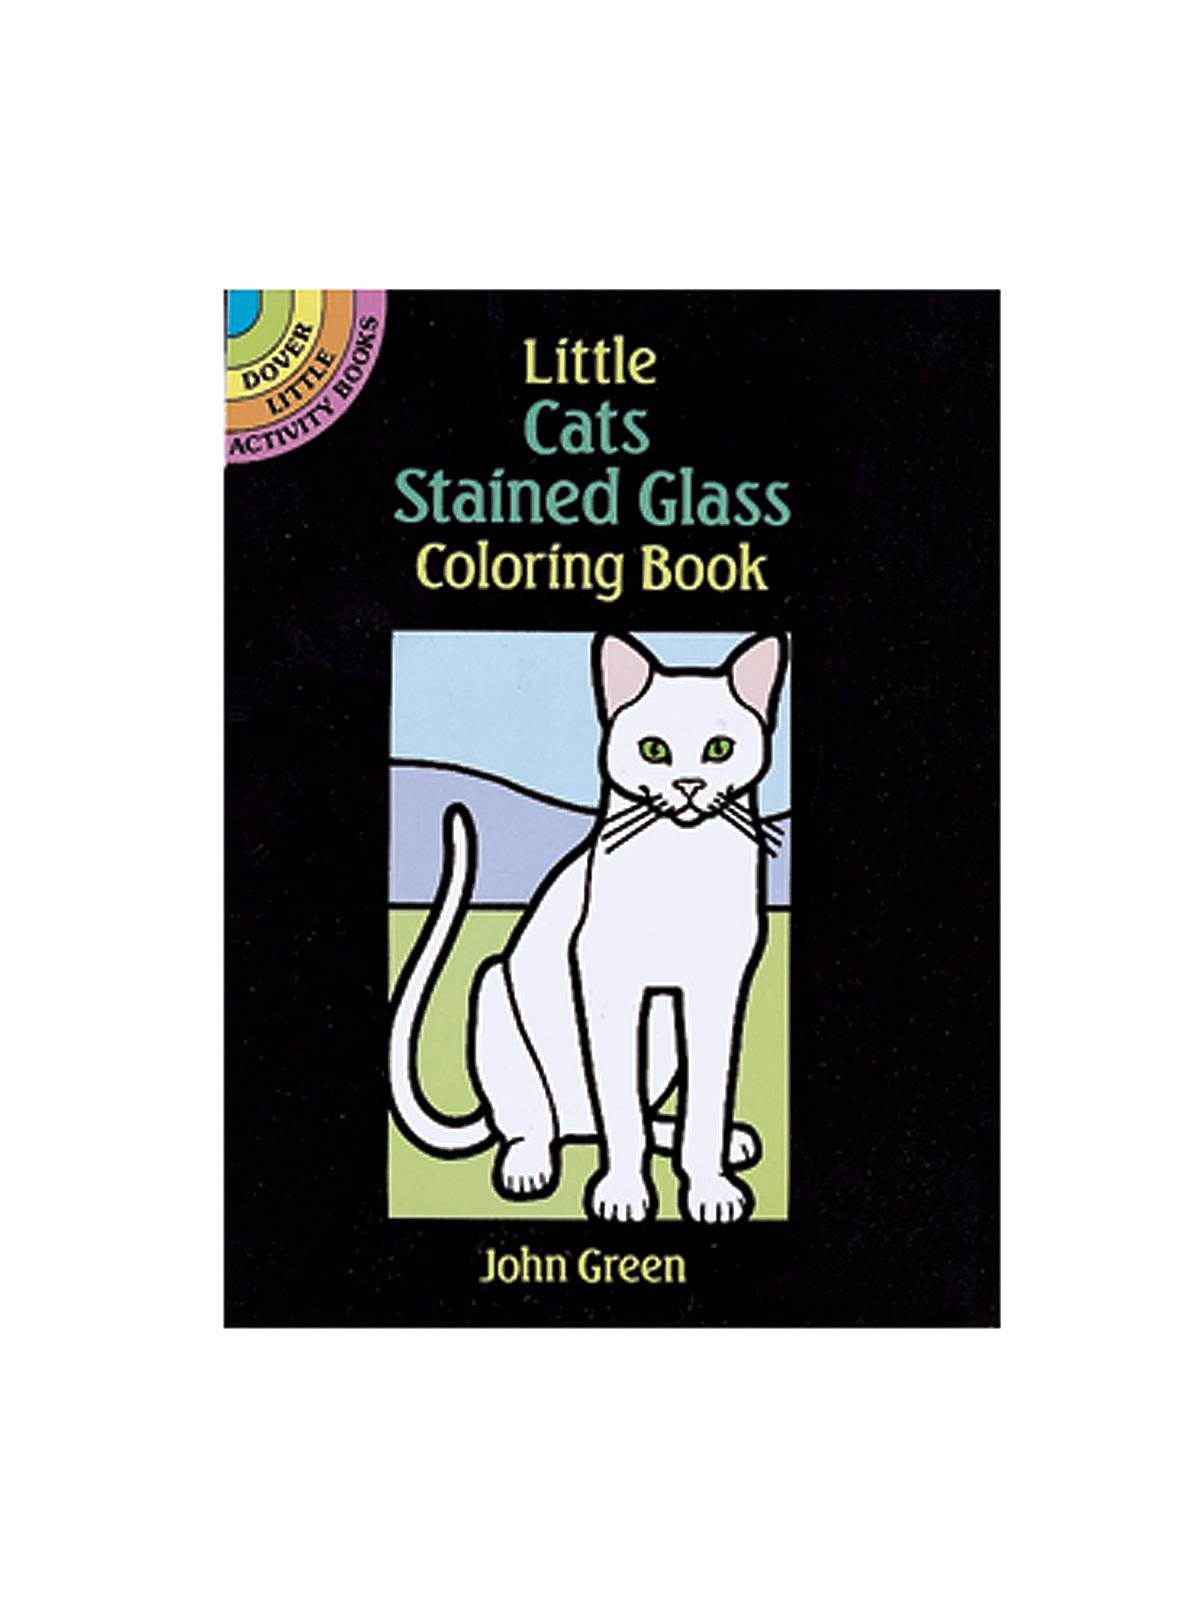 Cats-Stained Glass Coloring Book